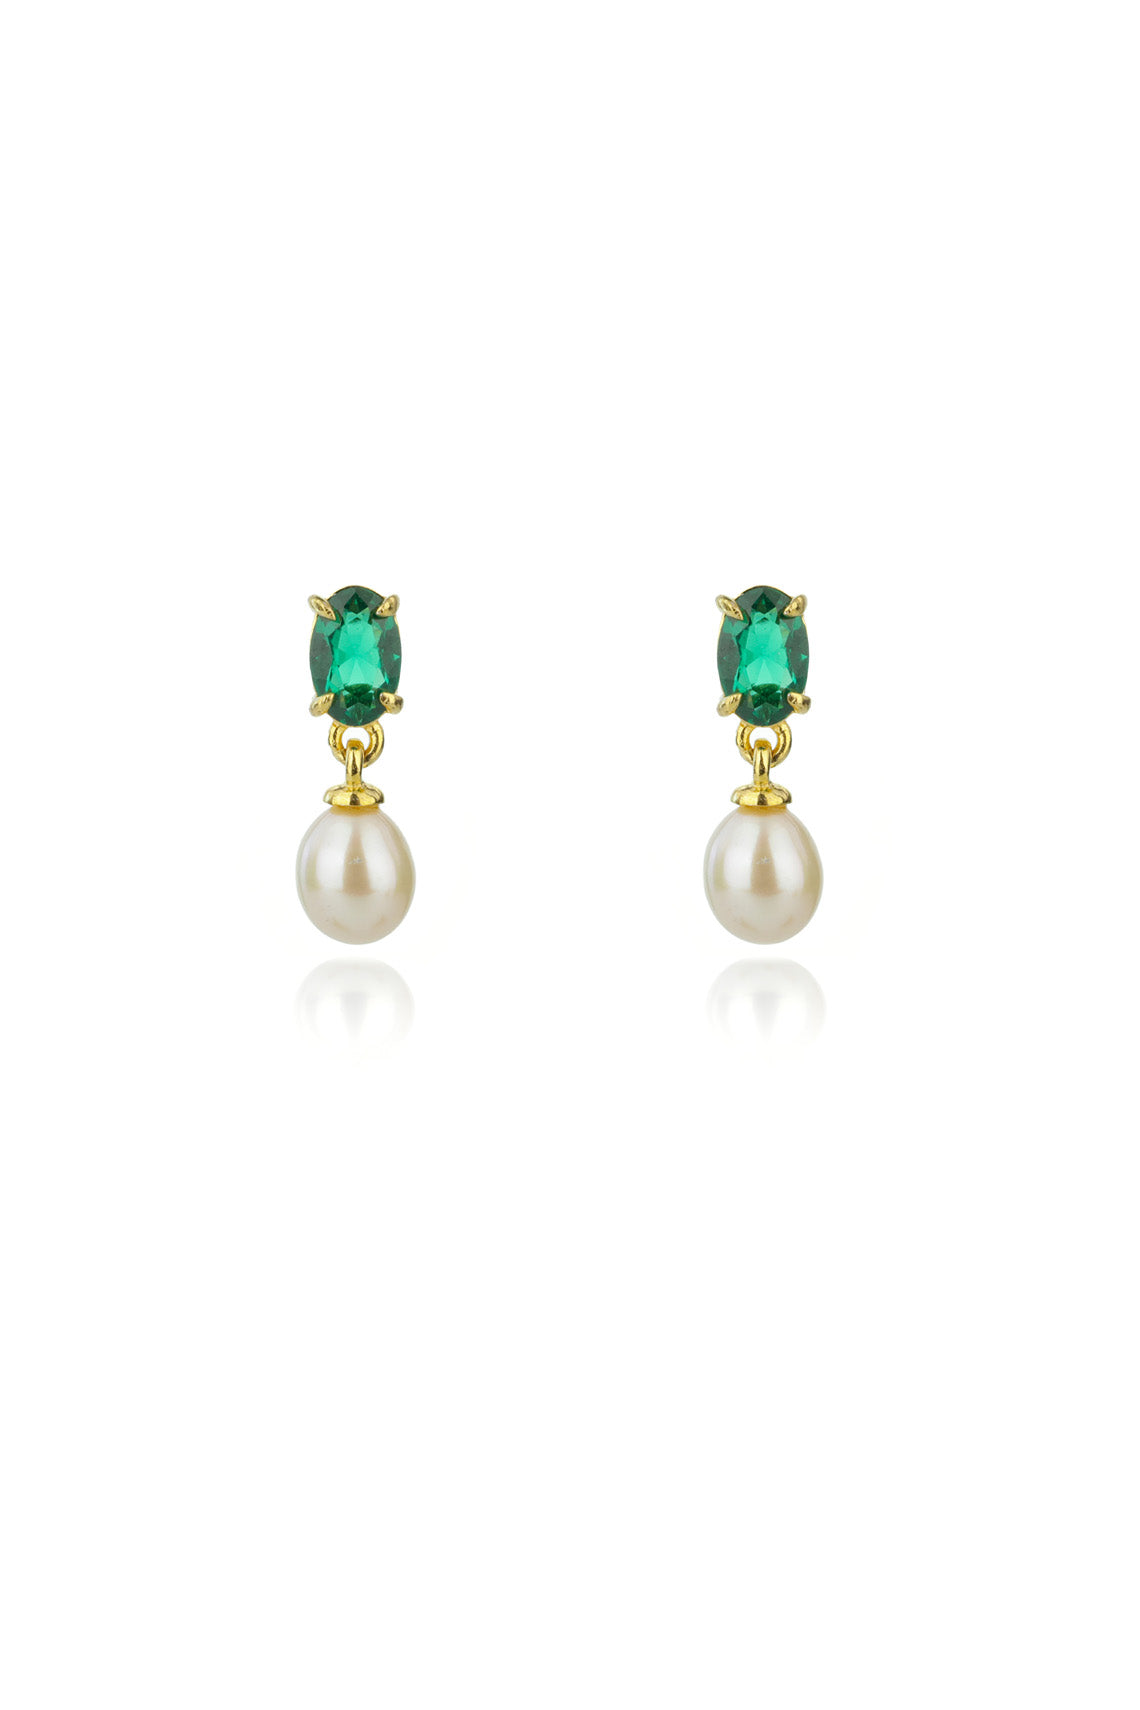 OCEANS WHITSUNDAY EARRINGS GREEN AND GOLD